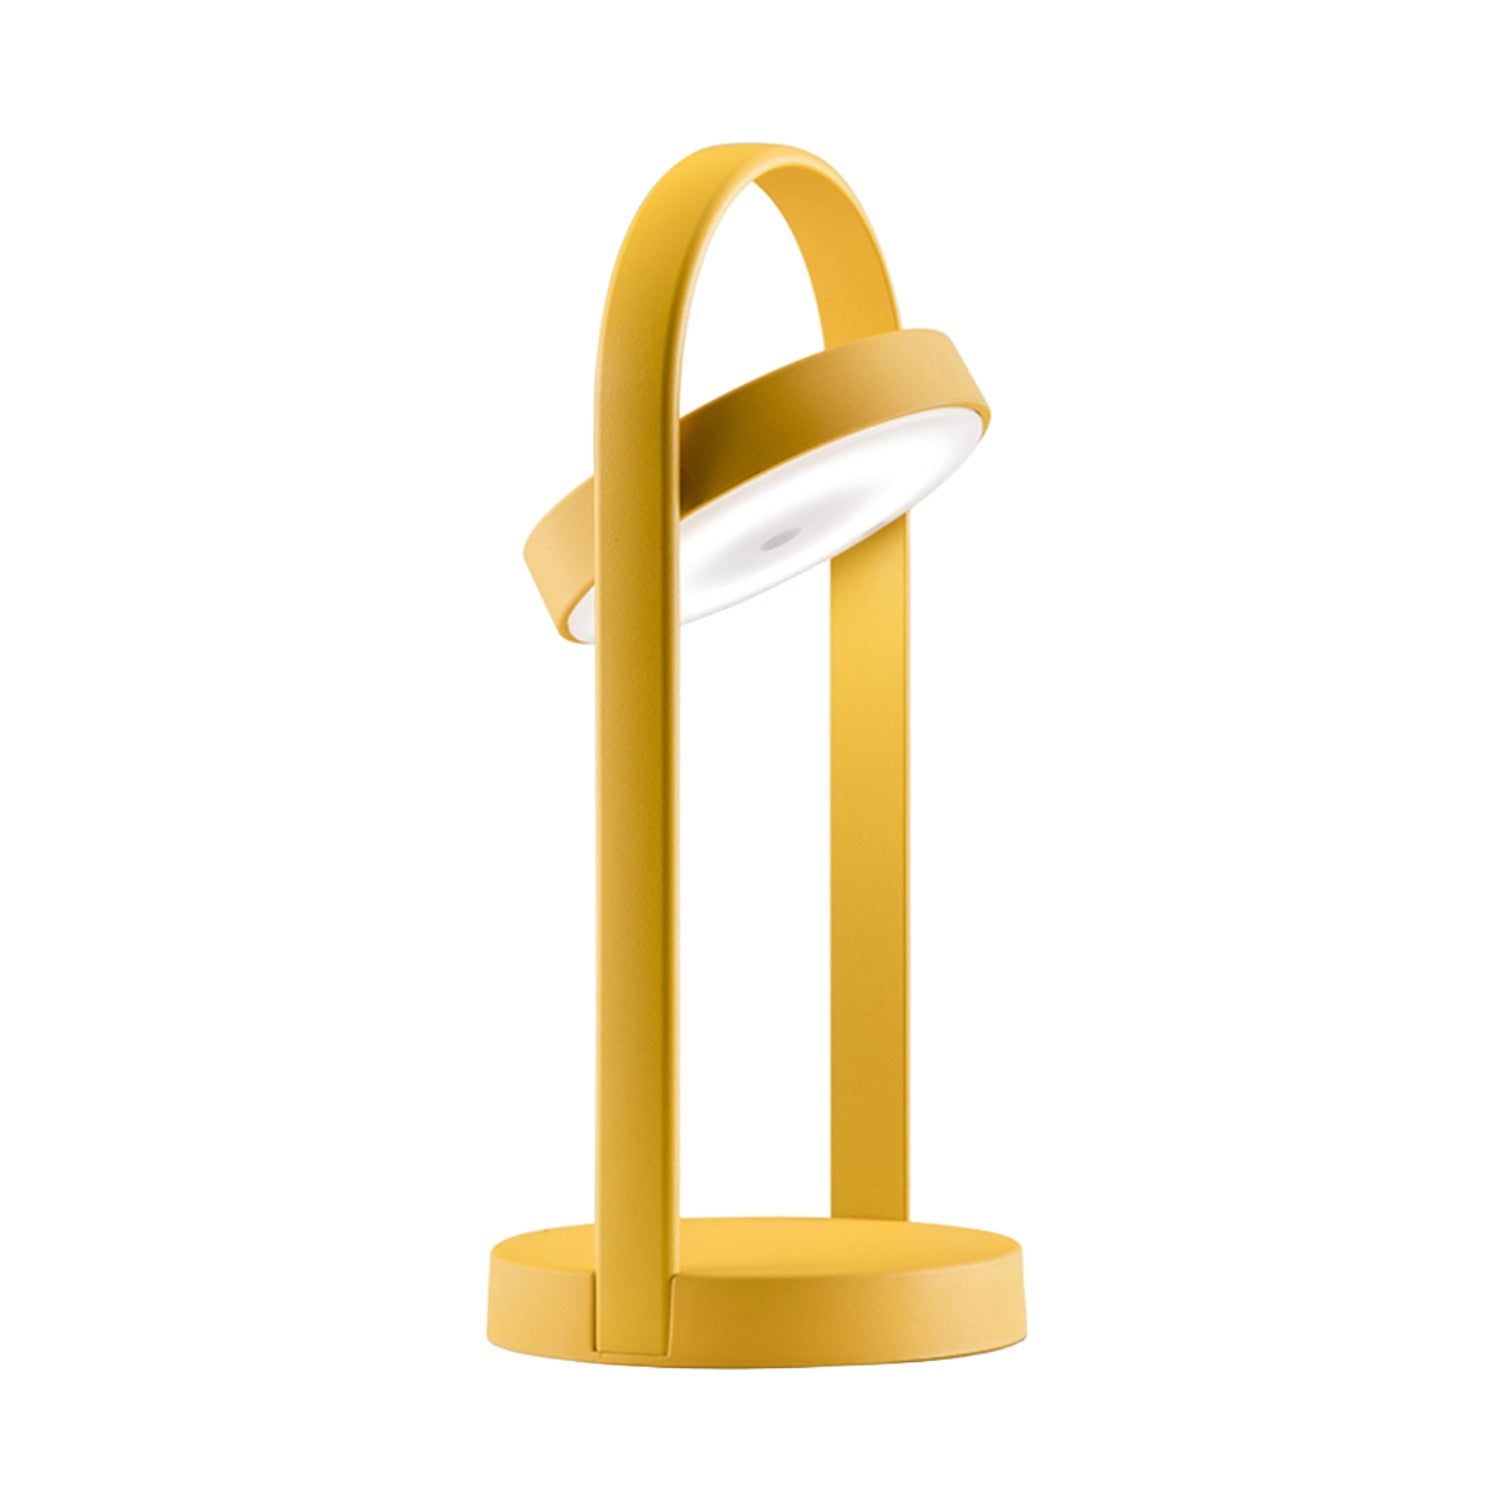 Pedrali 33 portable outdoor table lamp in yellow